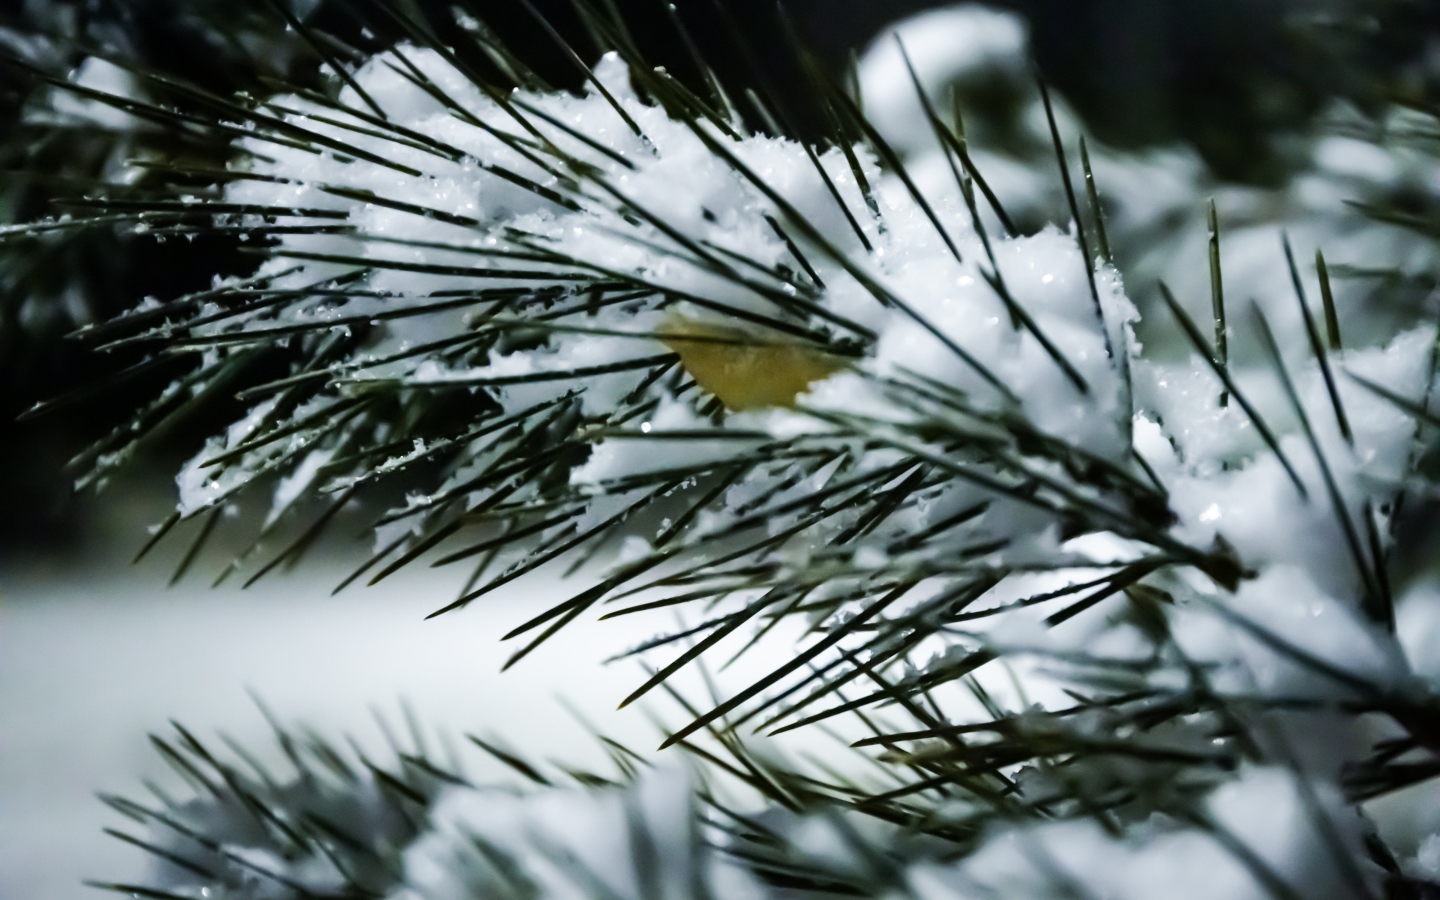 Snow covered pine branch with green needles close up